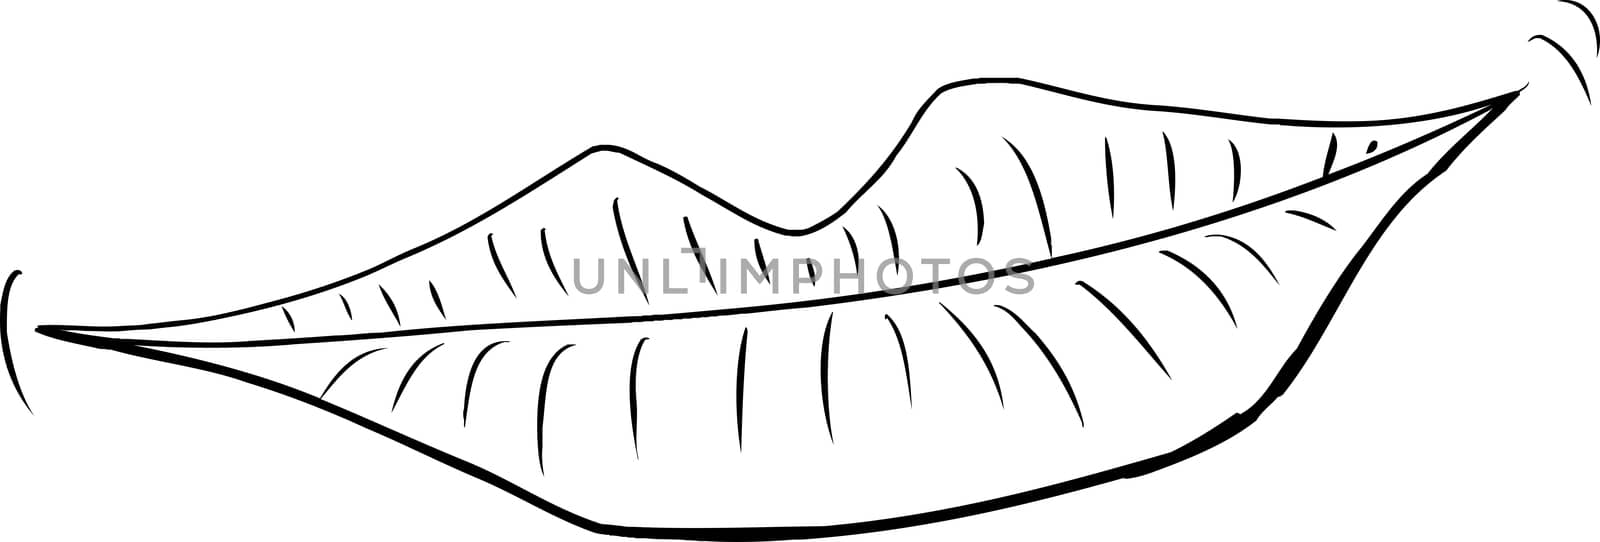 Outlined Pair of Lips by TheBlackRhino